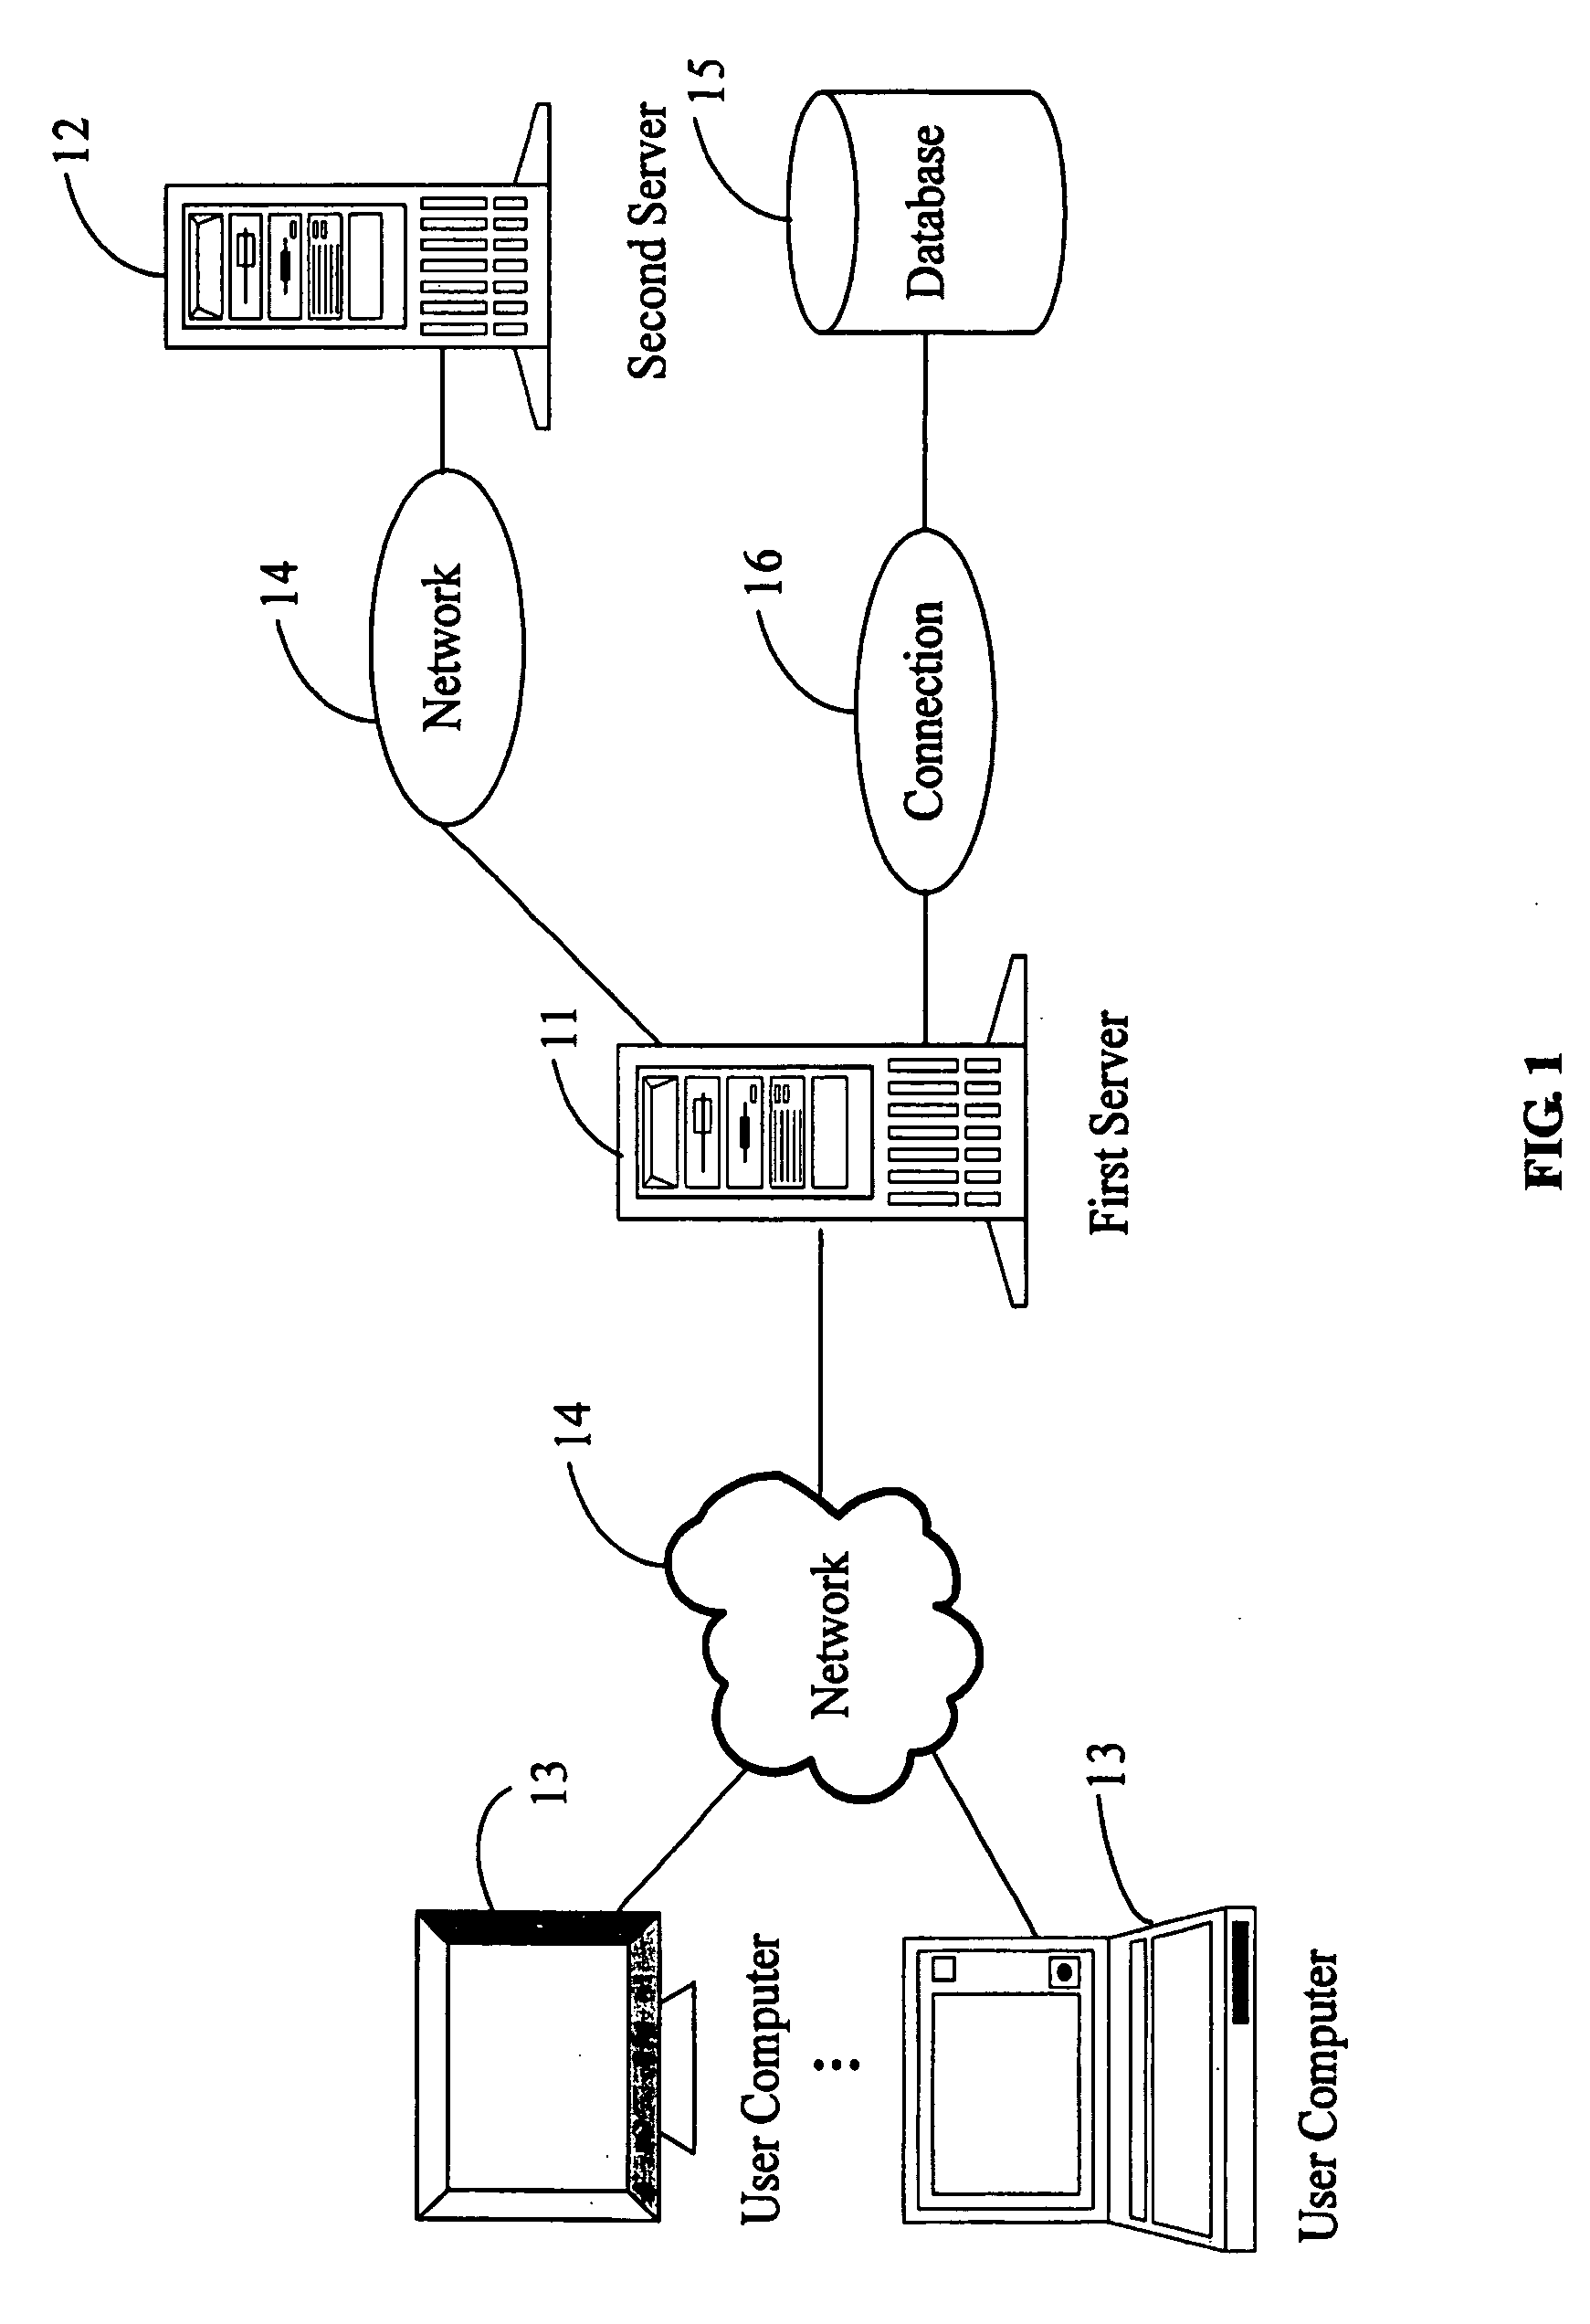 System and method for diagnosing production logistics abnormalities